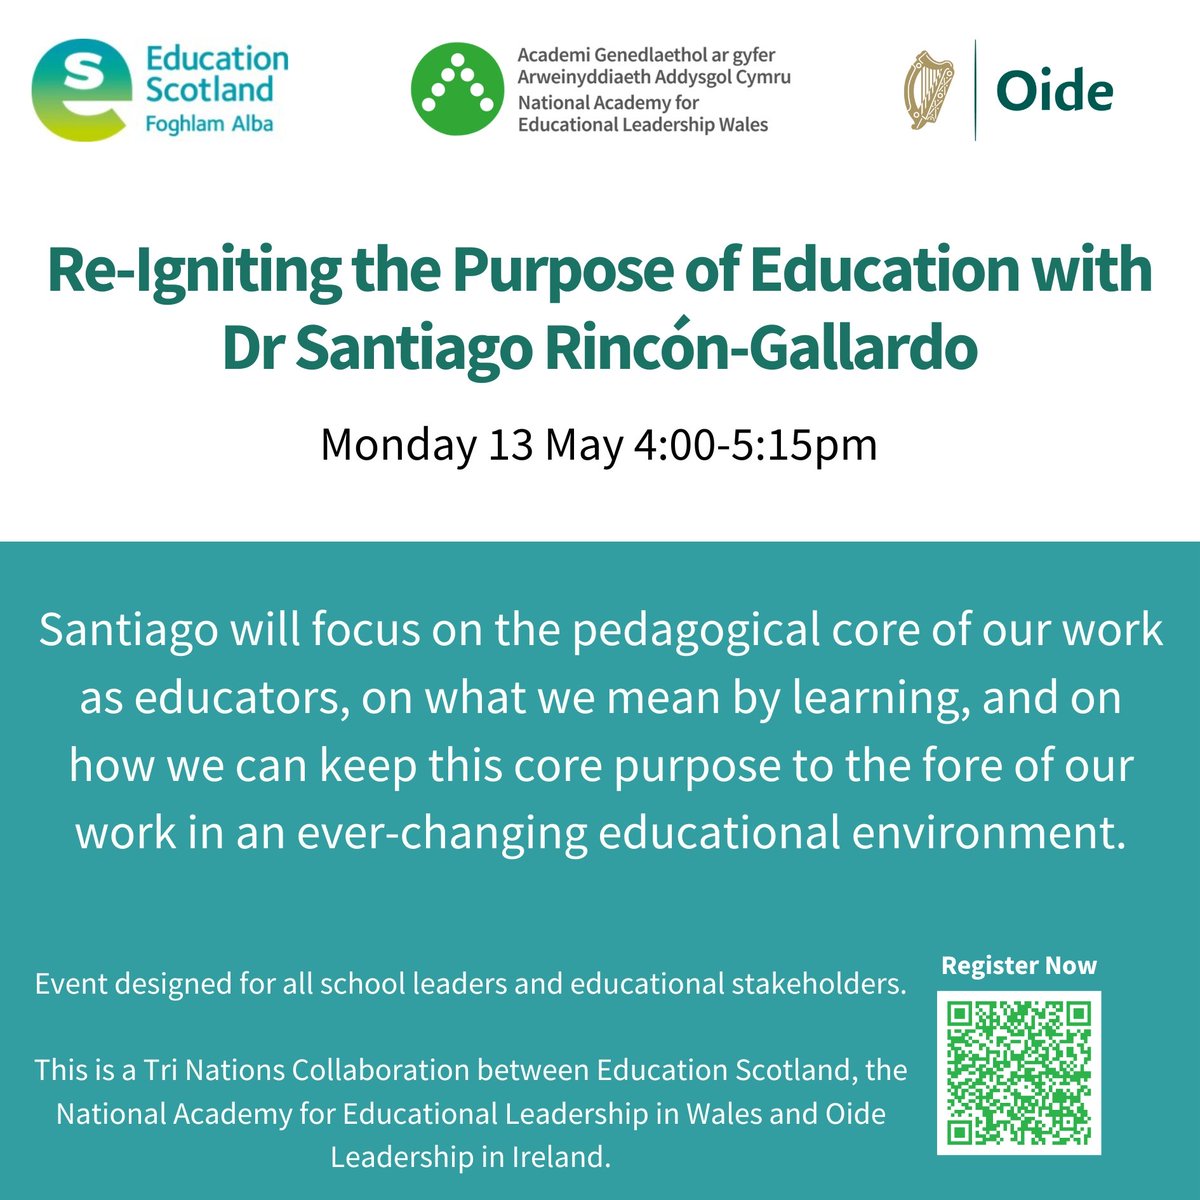 Oide Leadership is delighted to announce this event in collaboration with our colleagues ⁦@EducationScot⁩ and ⁦@NAELCymru⁩. We are privileged to introduce ⁦@SRinconGallardo⁩ to focus on leading teaching and learning. Join us May 13th @4pm. Register in advance.